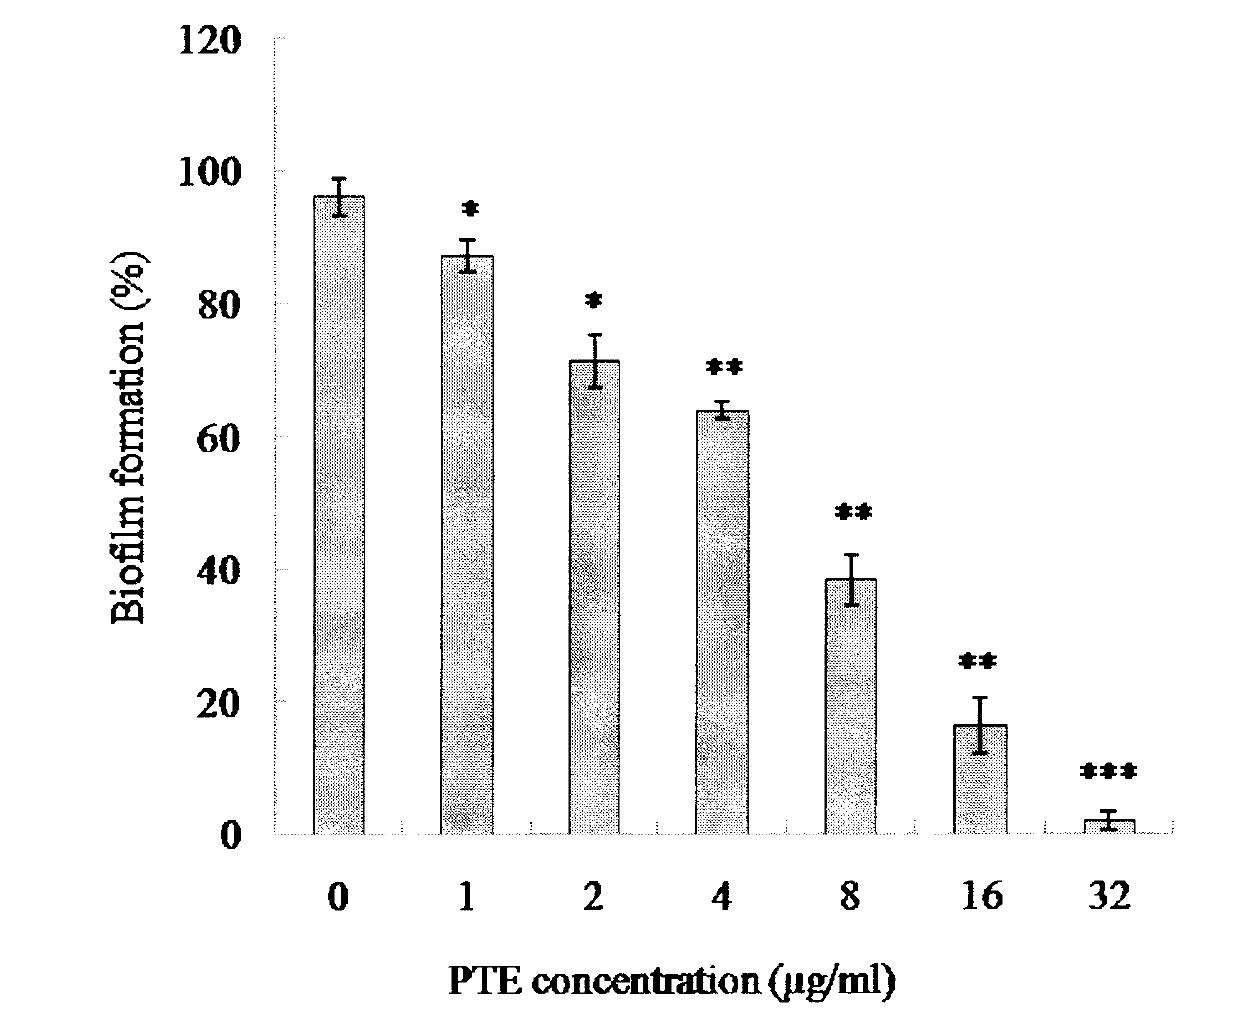 New application of pterostilbene to anti-fungal biofilm